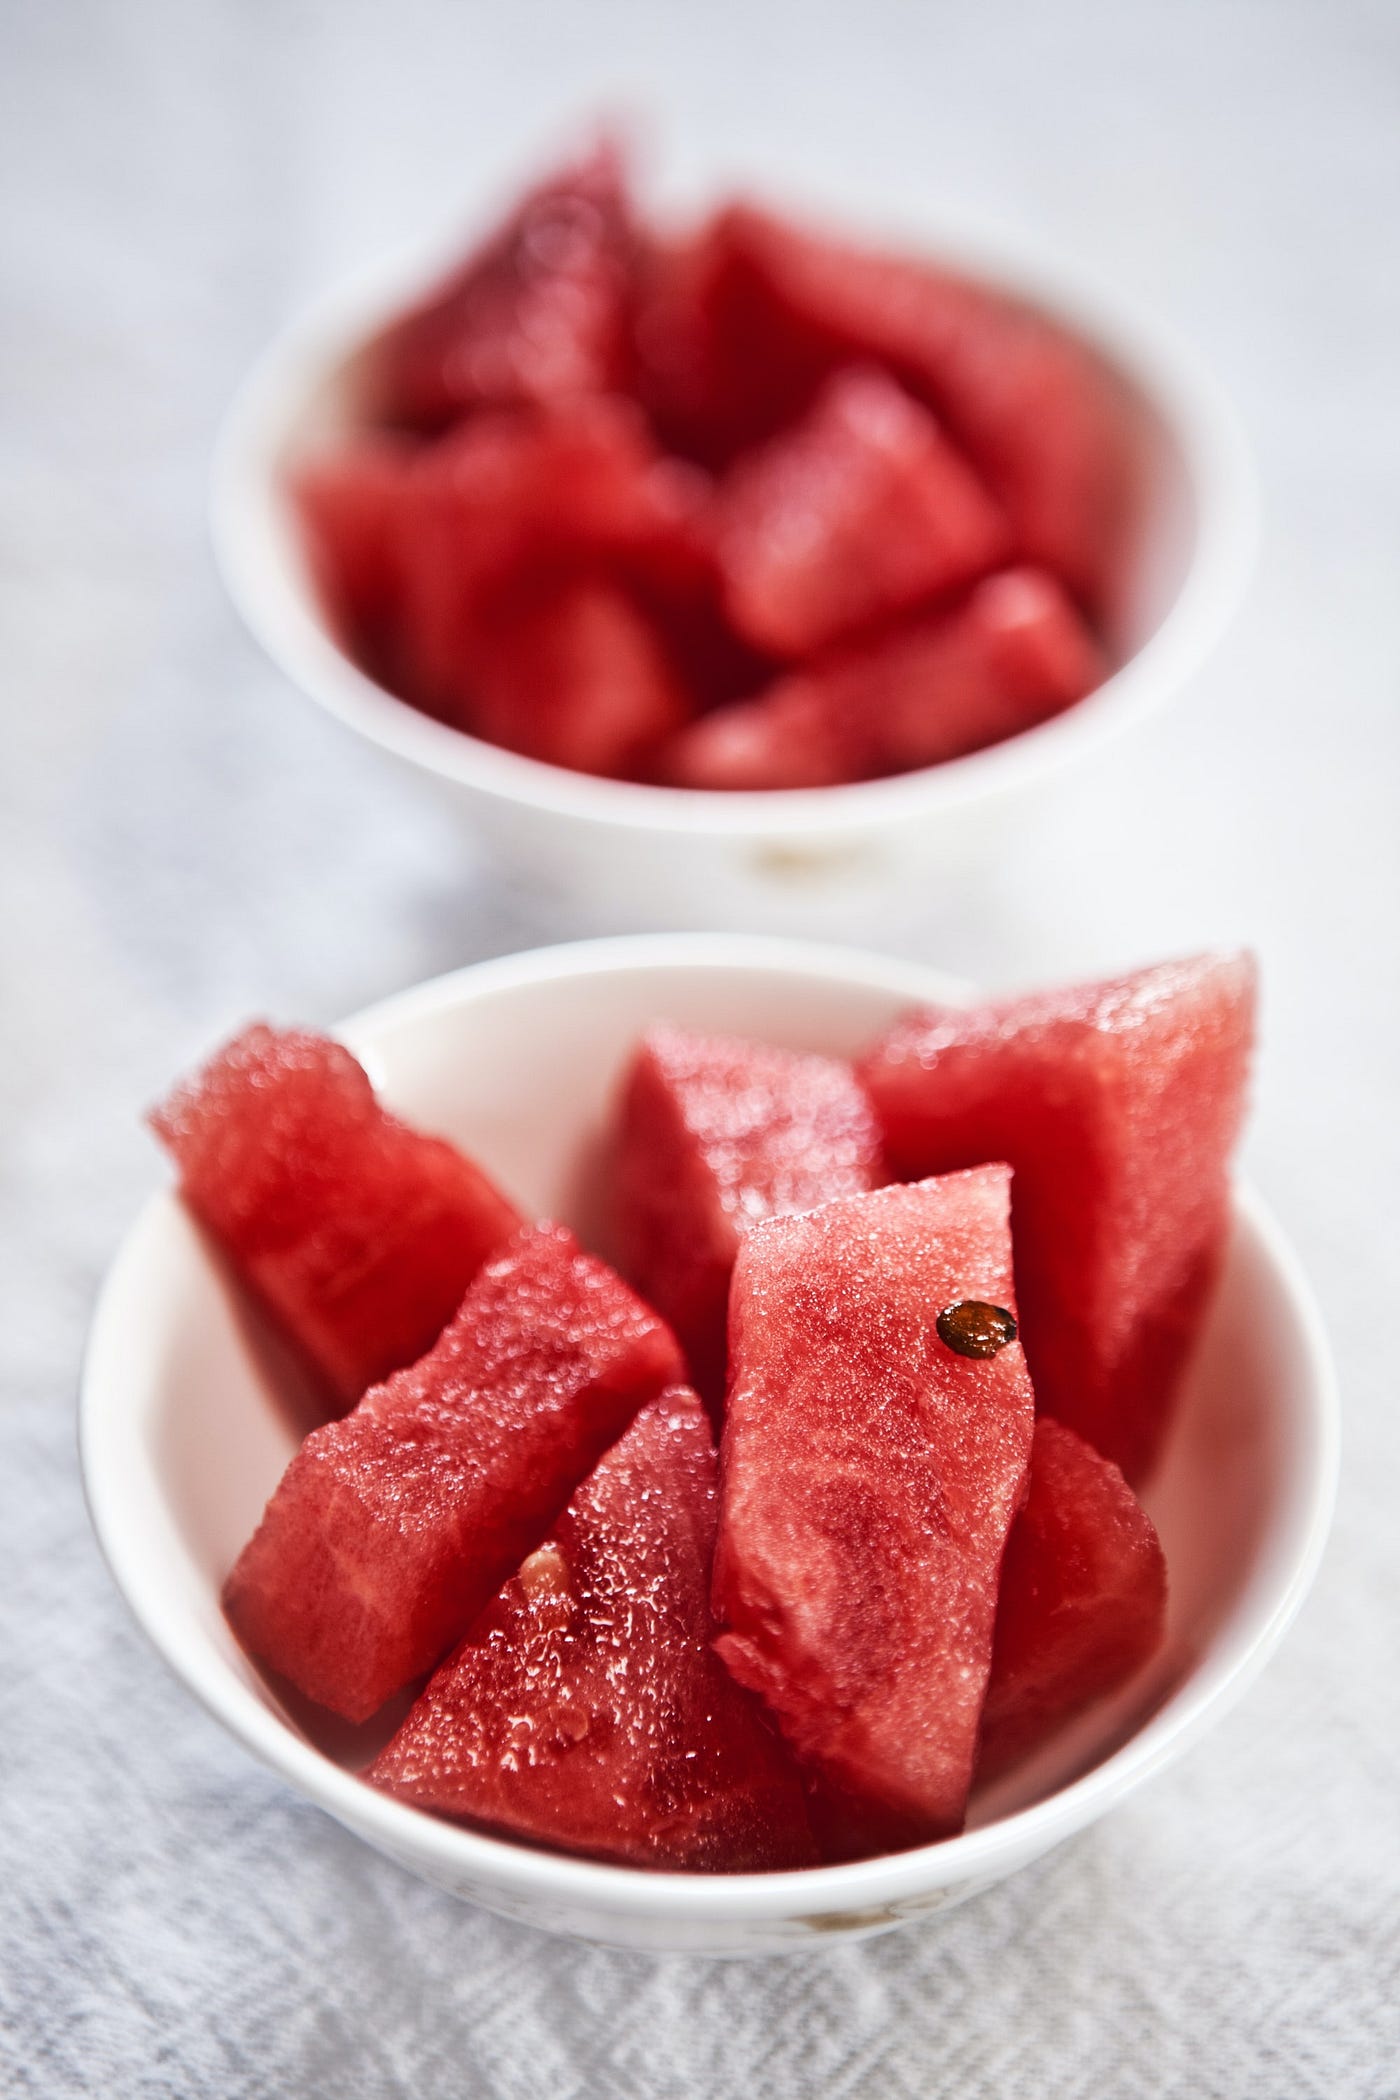 Two bowls of cut up watermelon on the counter.